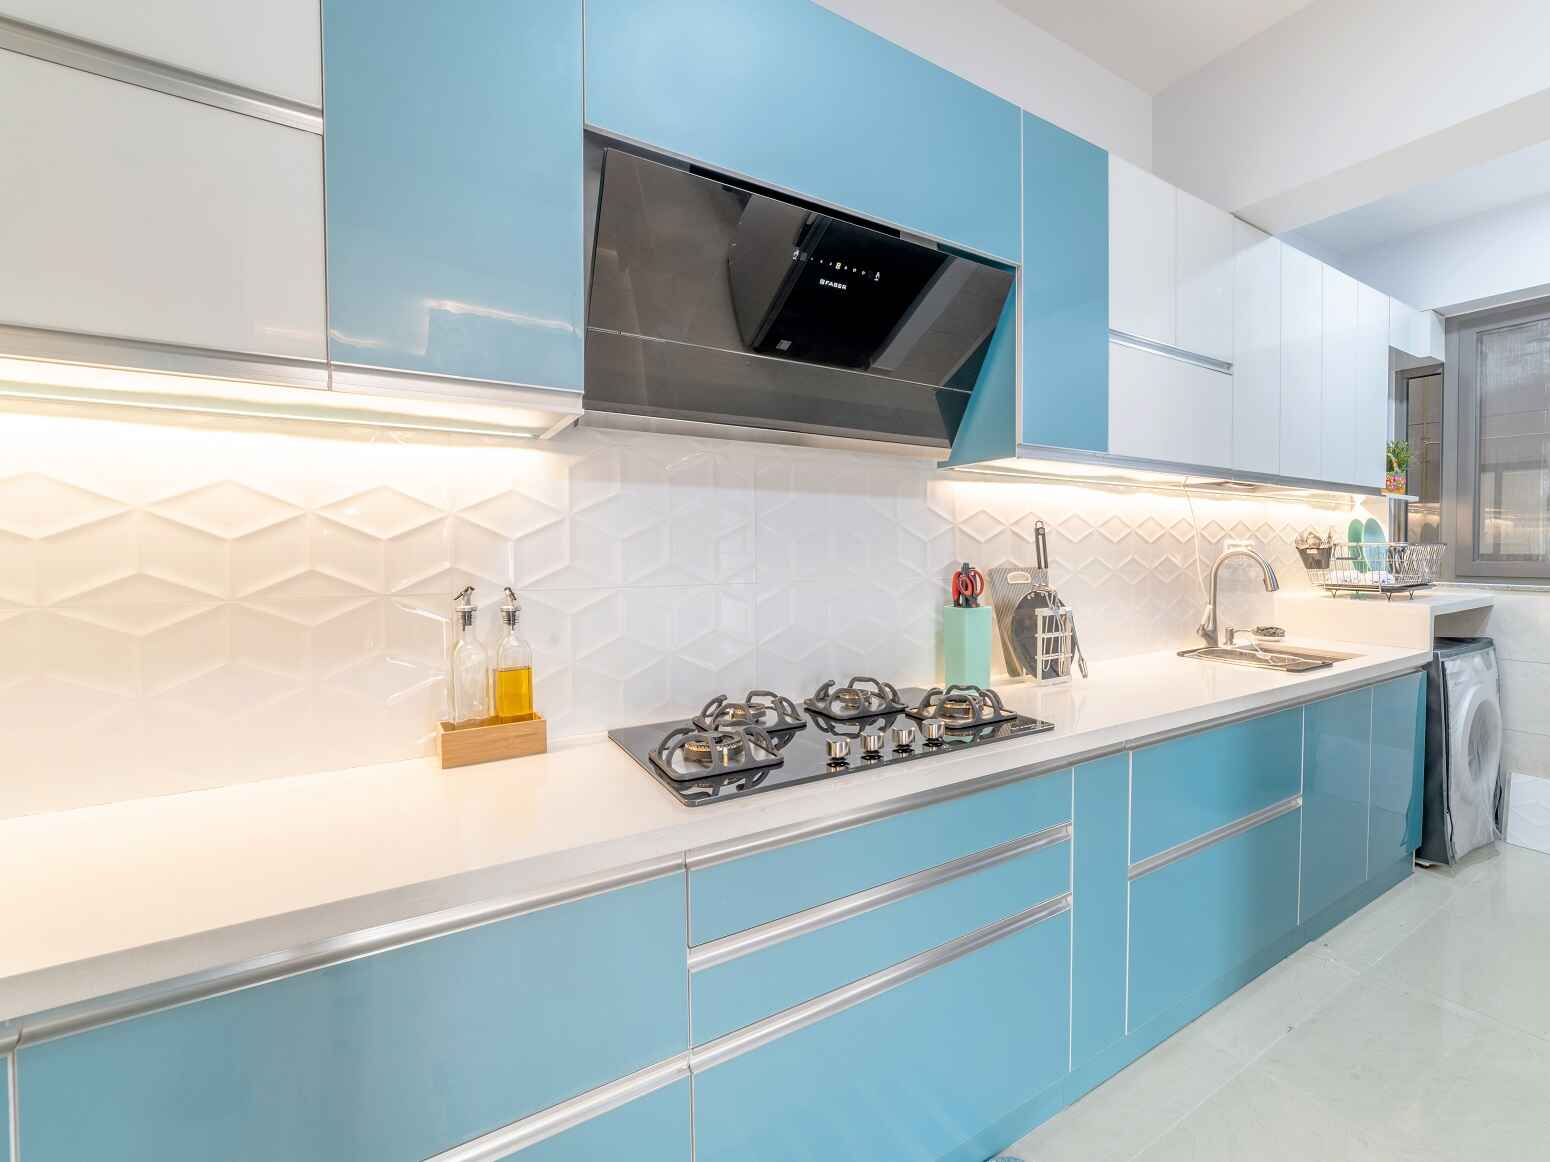 Are you looking for a modular kitchen designer in Bangalore? We have the best one for you